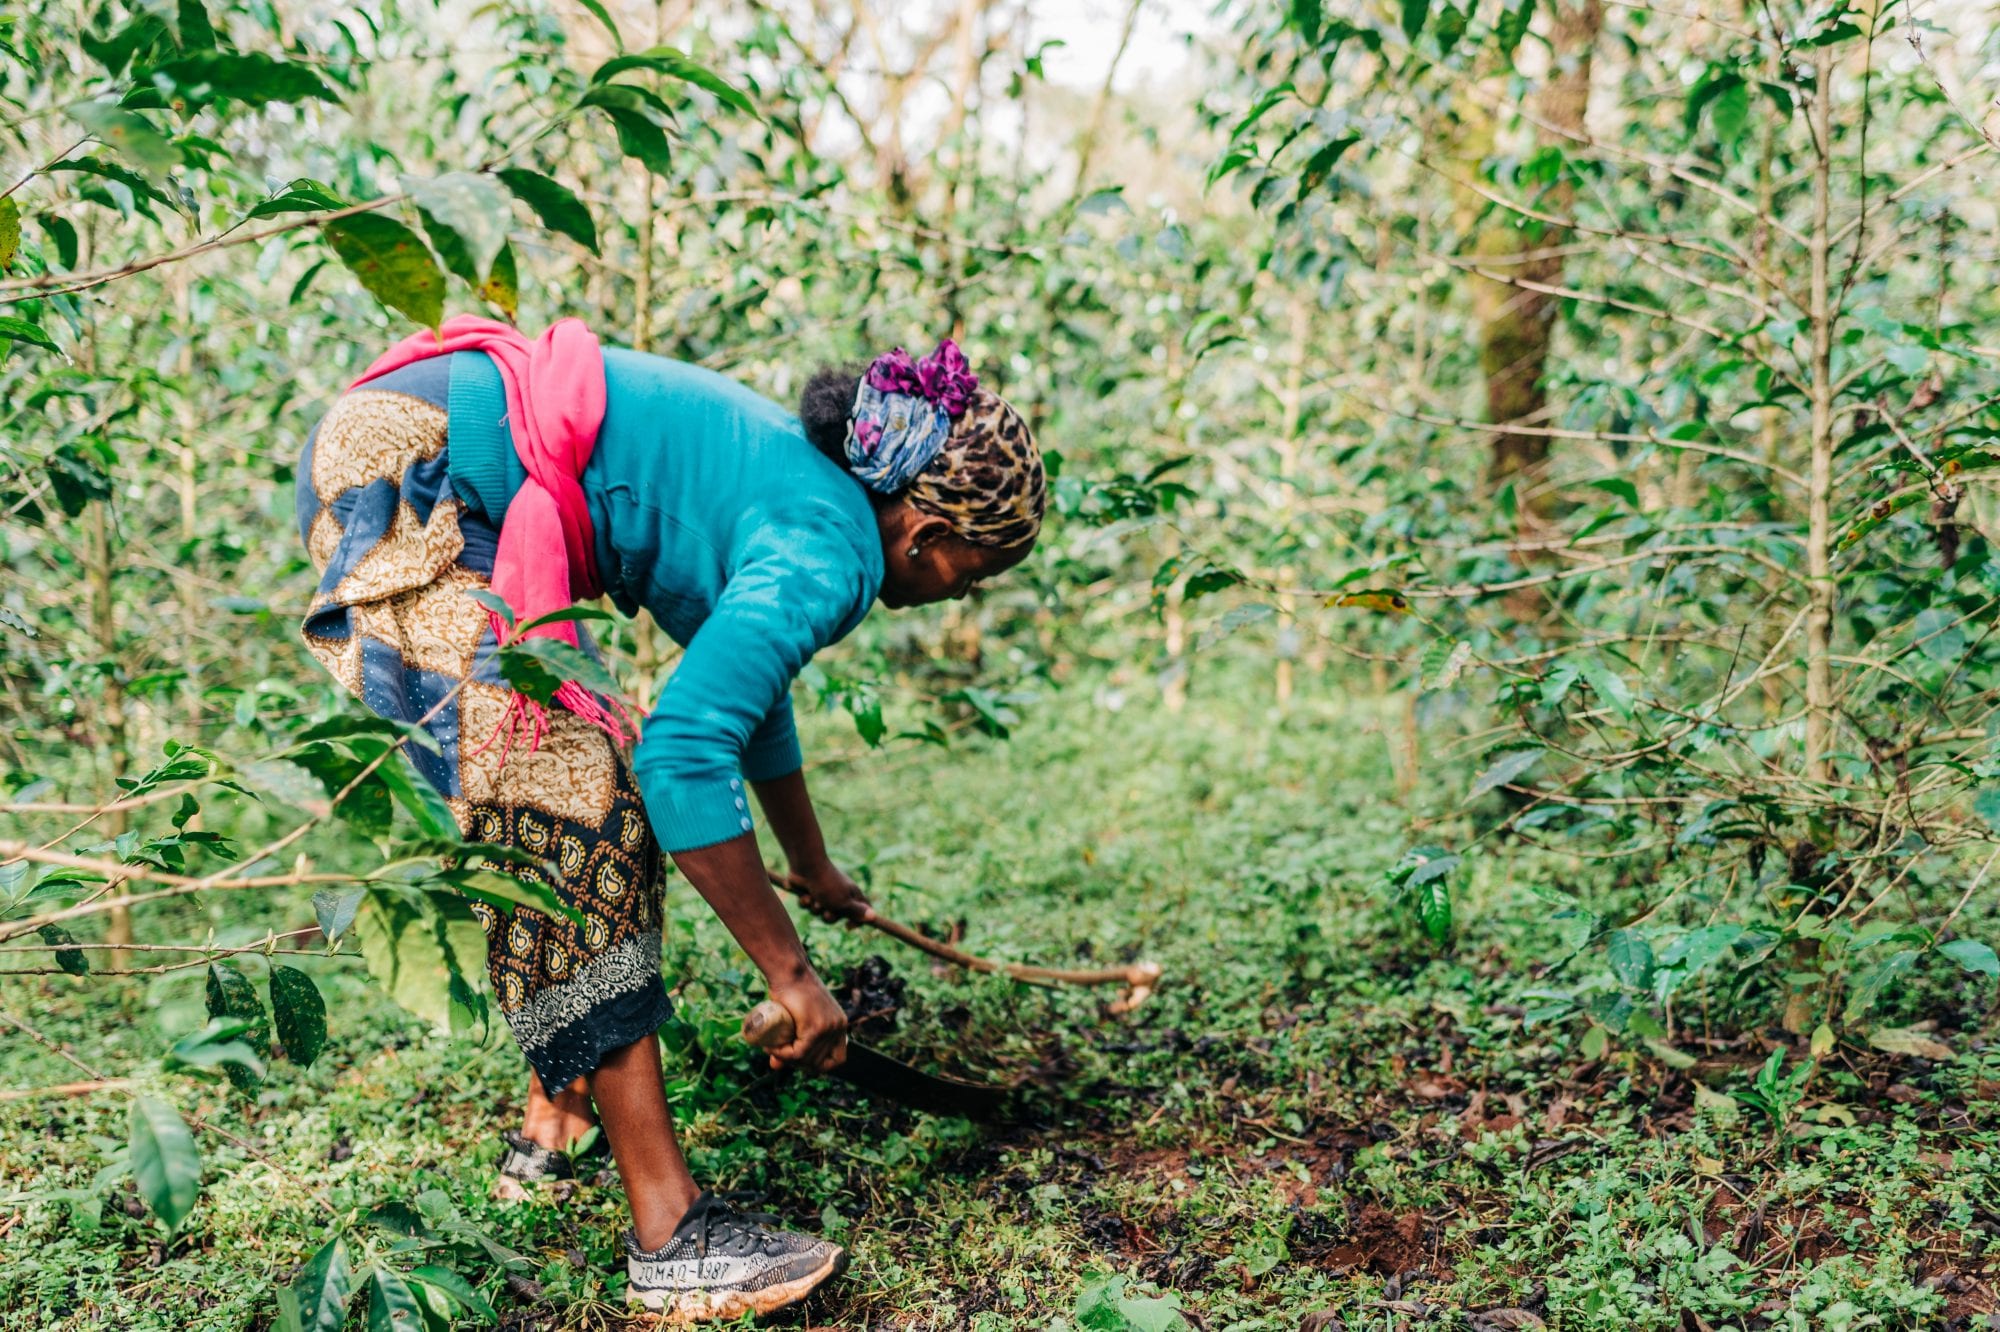 the lasting impact of coffee made all the difference for Lubaba. Here, she tends to her coffee trees in western Ethiopia